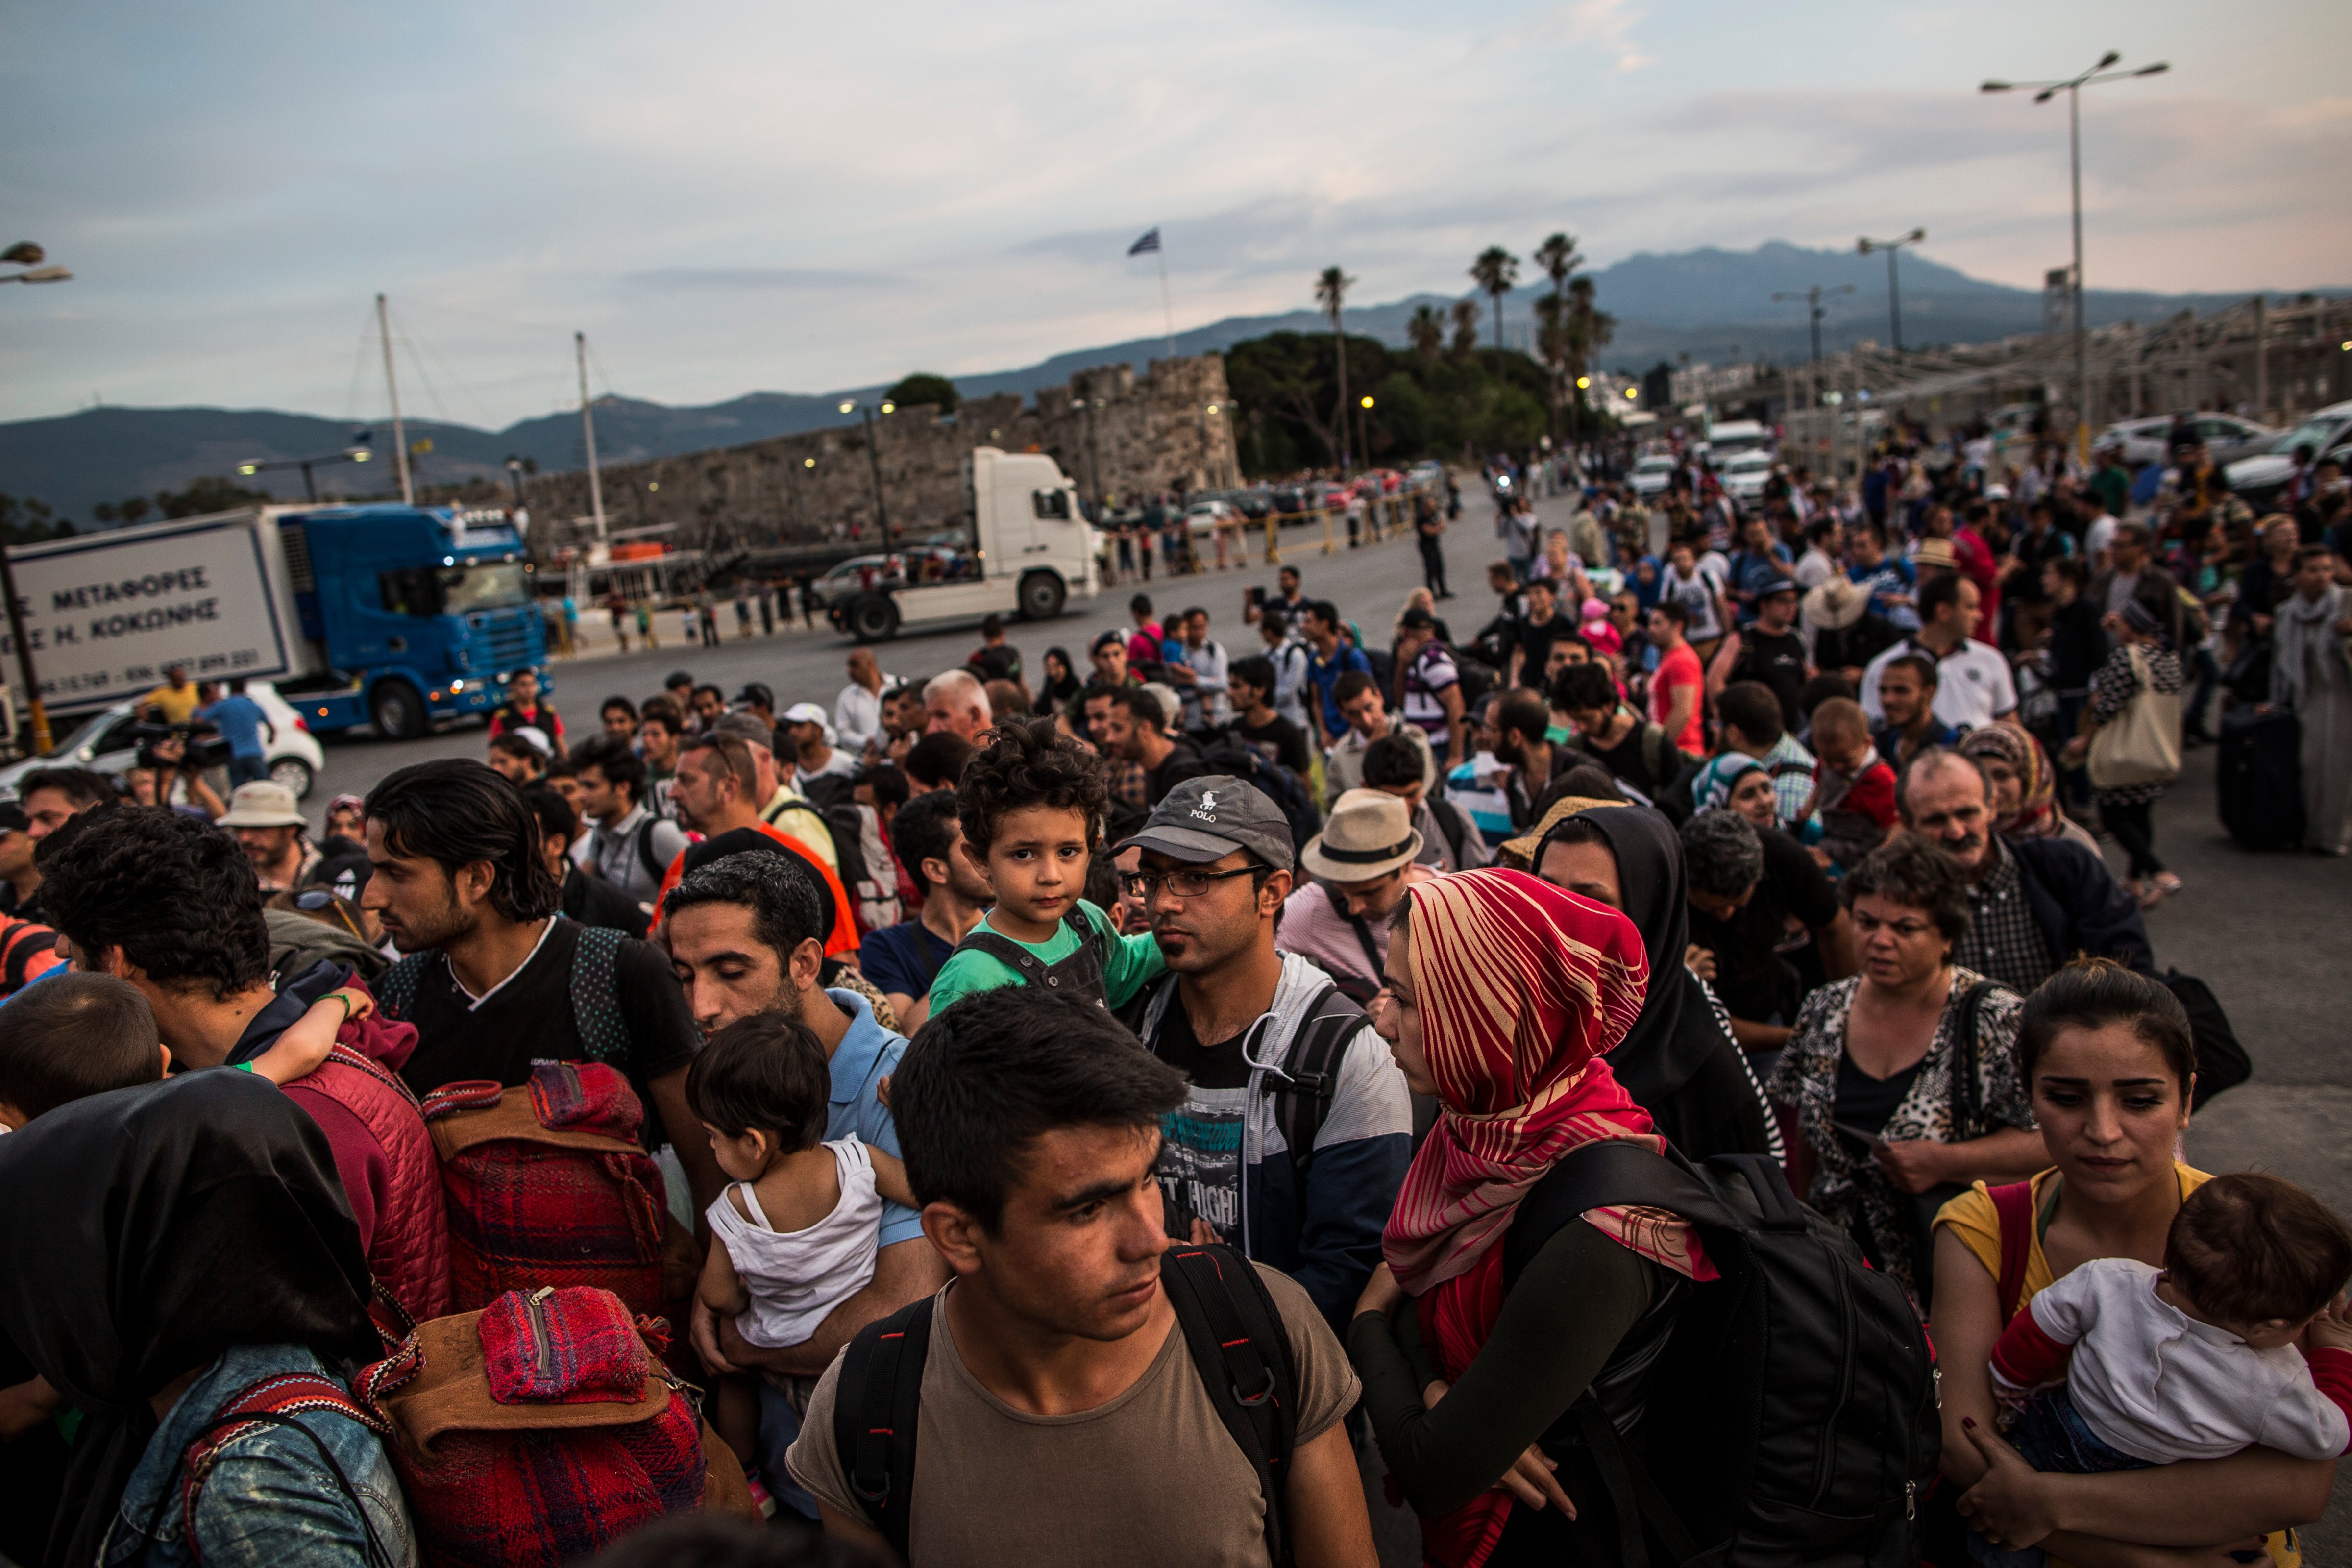 Hundreds of migrant men, women and children along with tourists and locals board a ferry bound for Athens on June 04, 2015 in Kos, Greece. (Dan Kitwood—Getty Images)